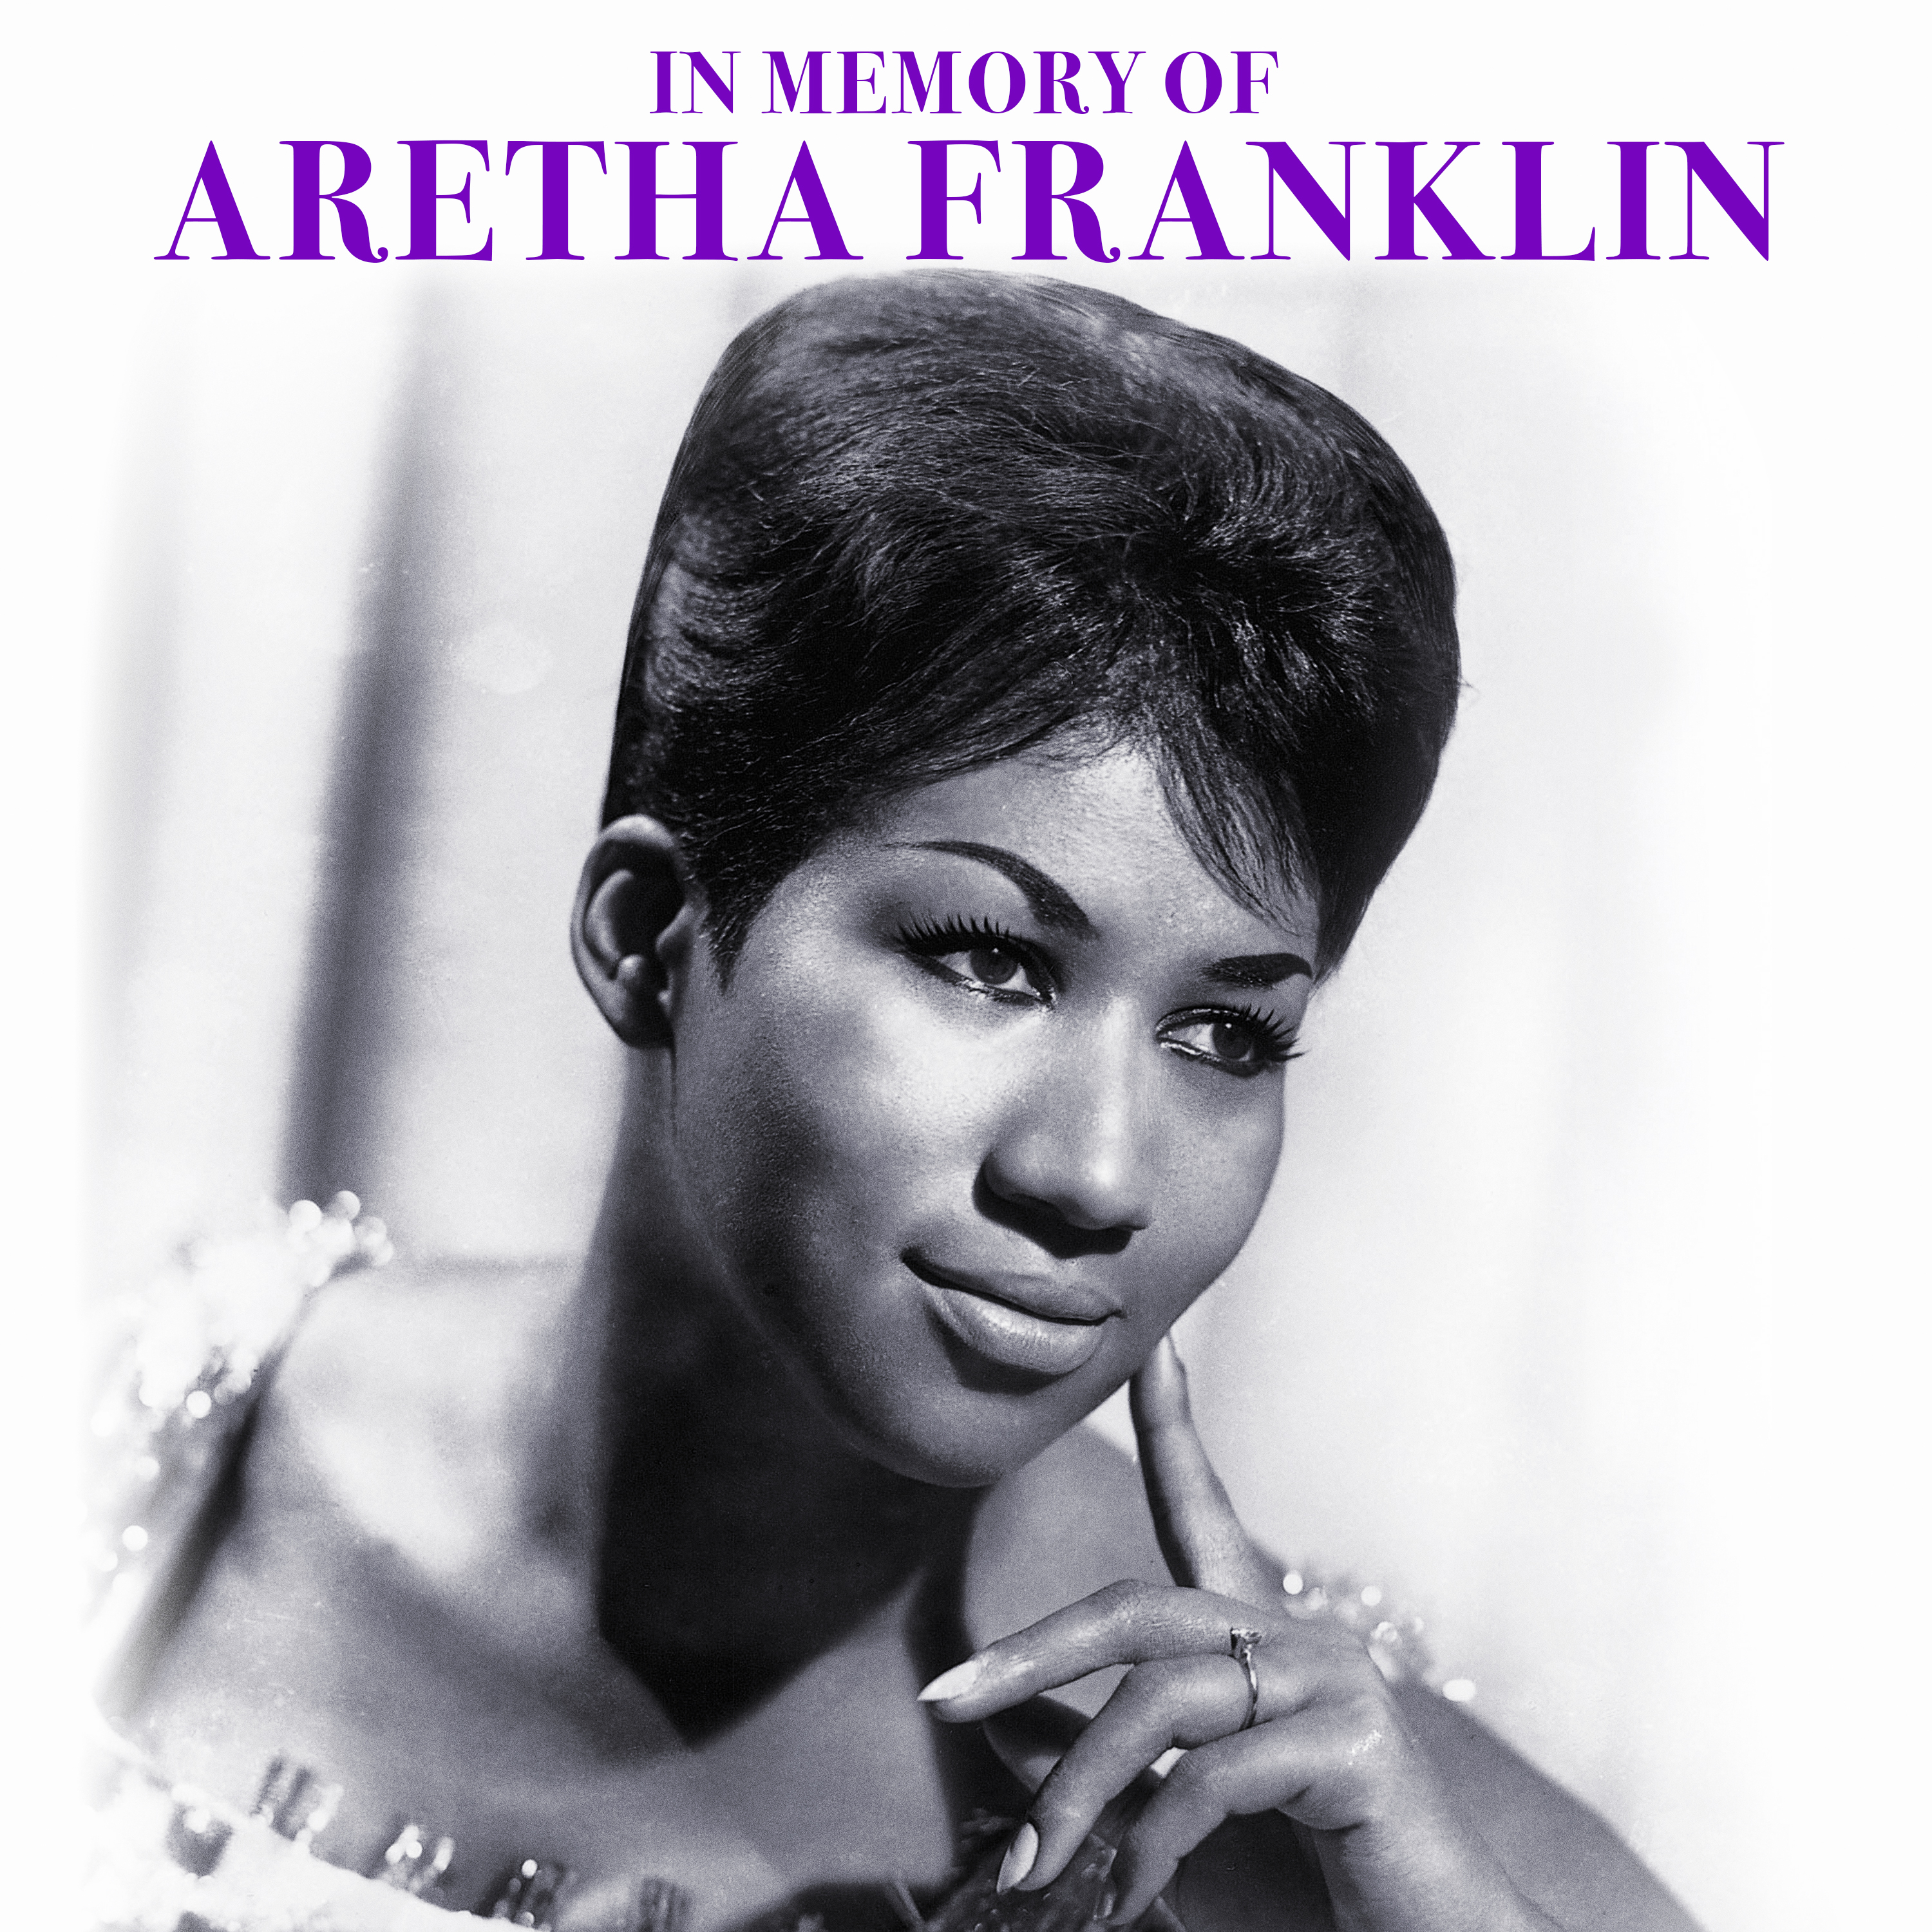 In Memory of Aretha Franklin